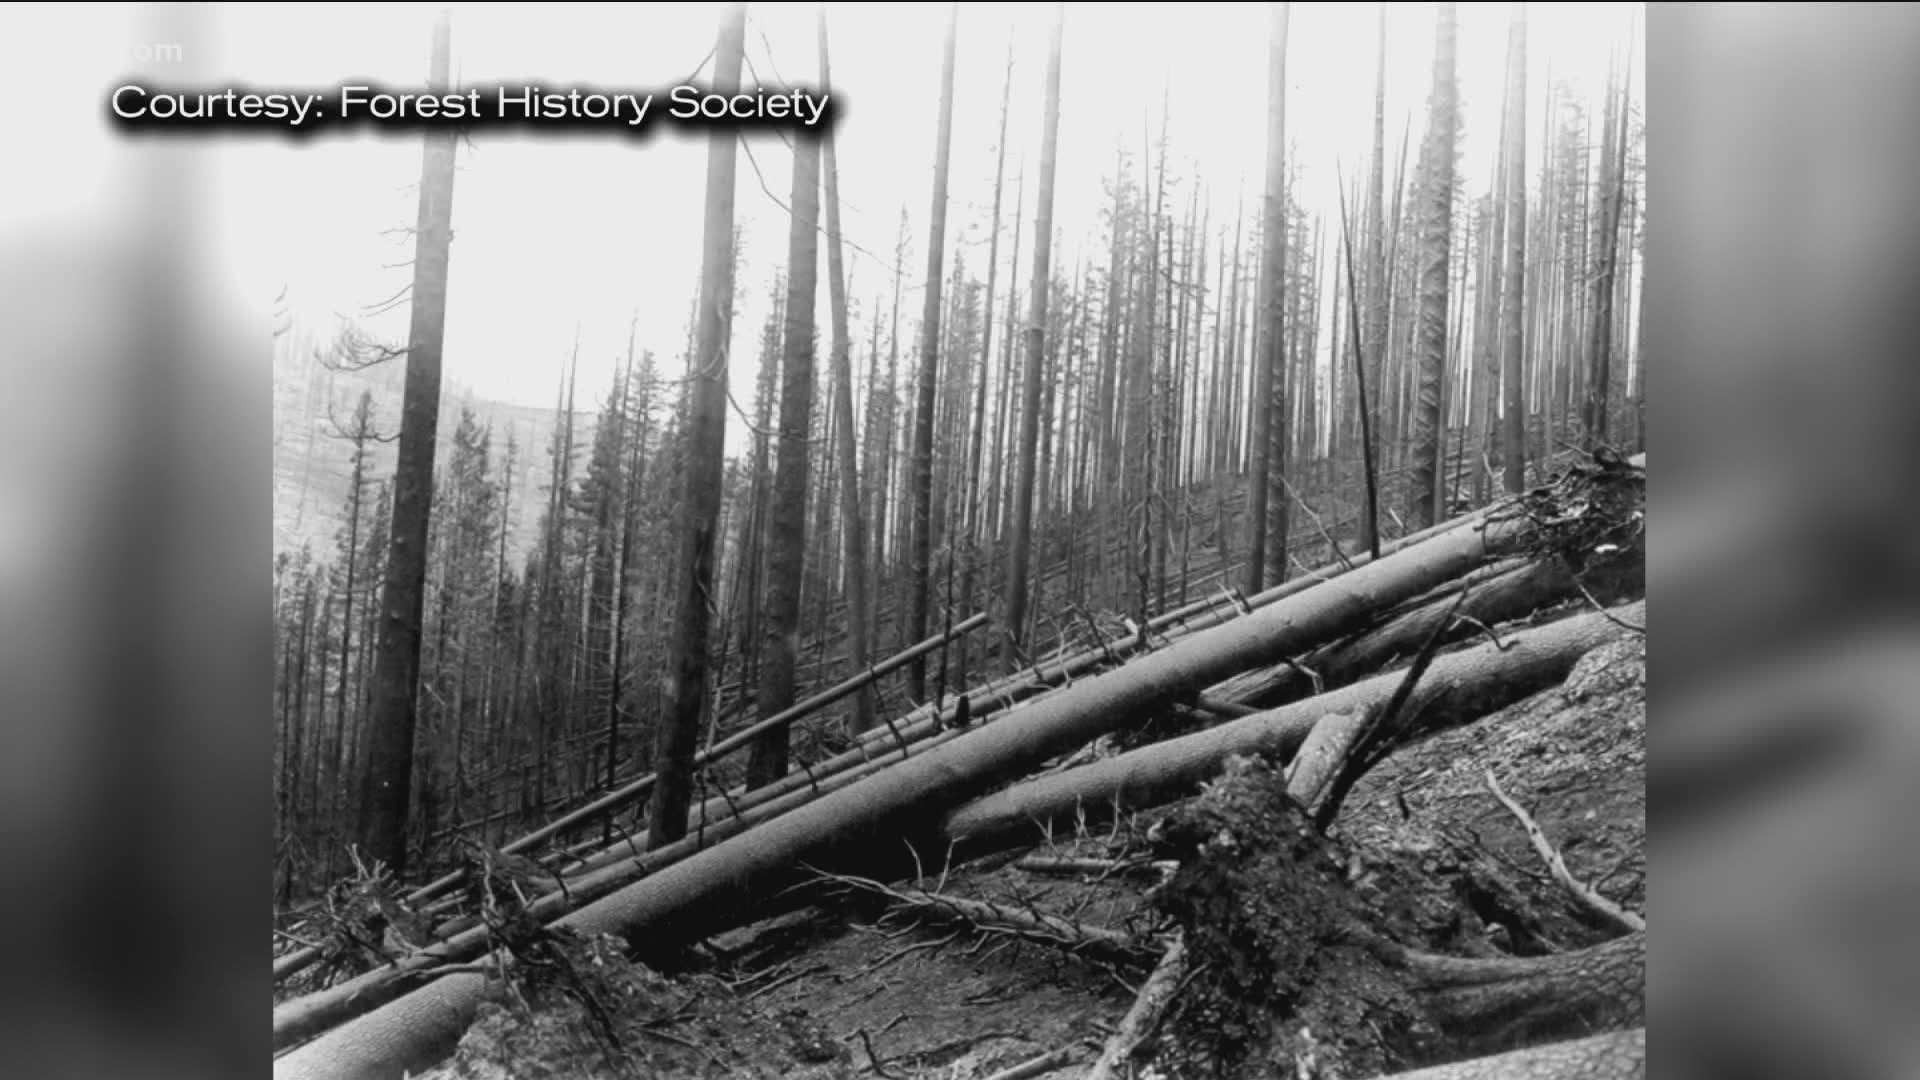 One of the worst natural disasters in 20th century American history happened here in Idaho. It was a  
wildfire called "The Big Blow-up" or "The Big Burn."